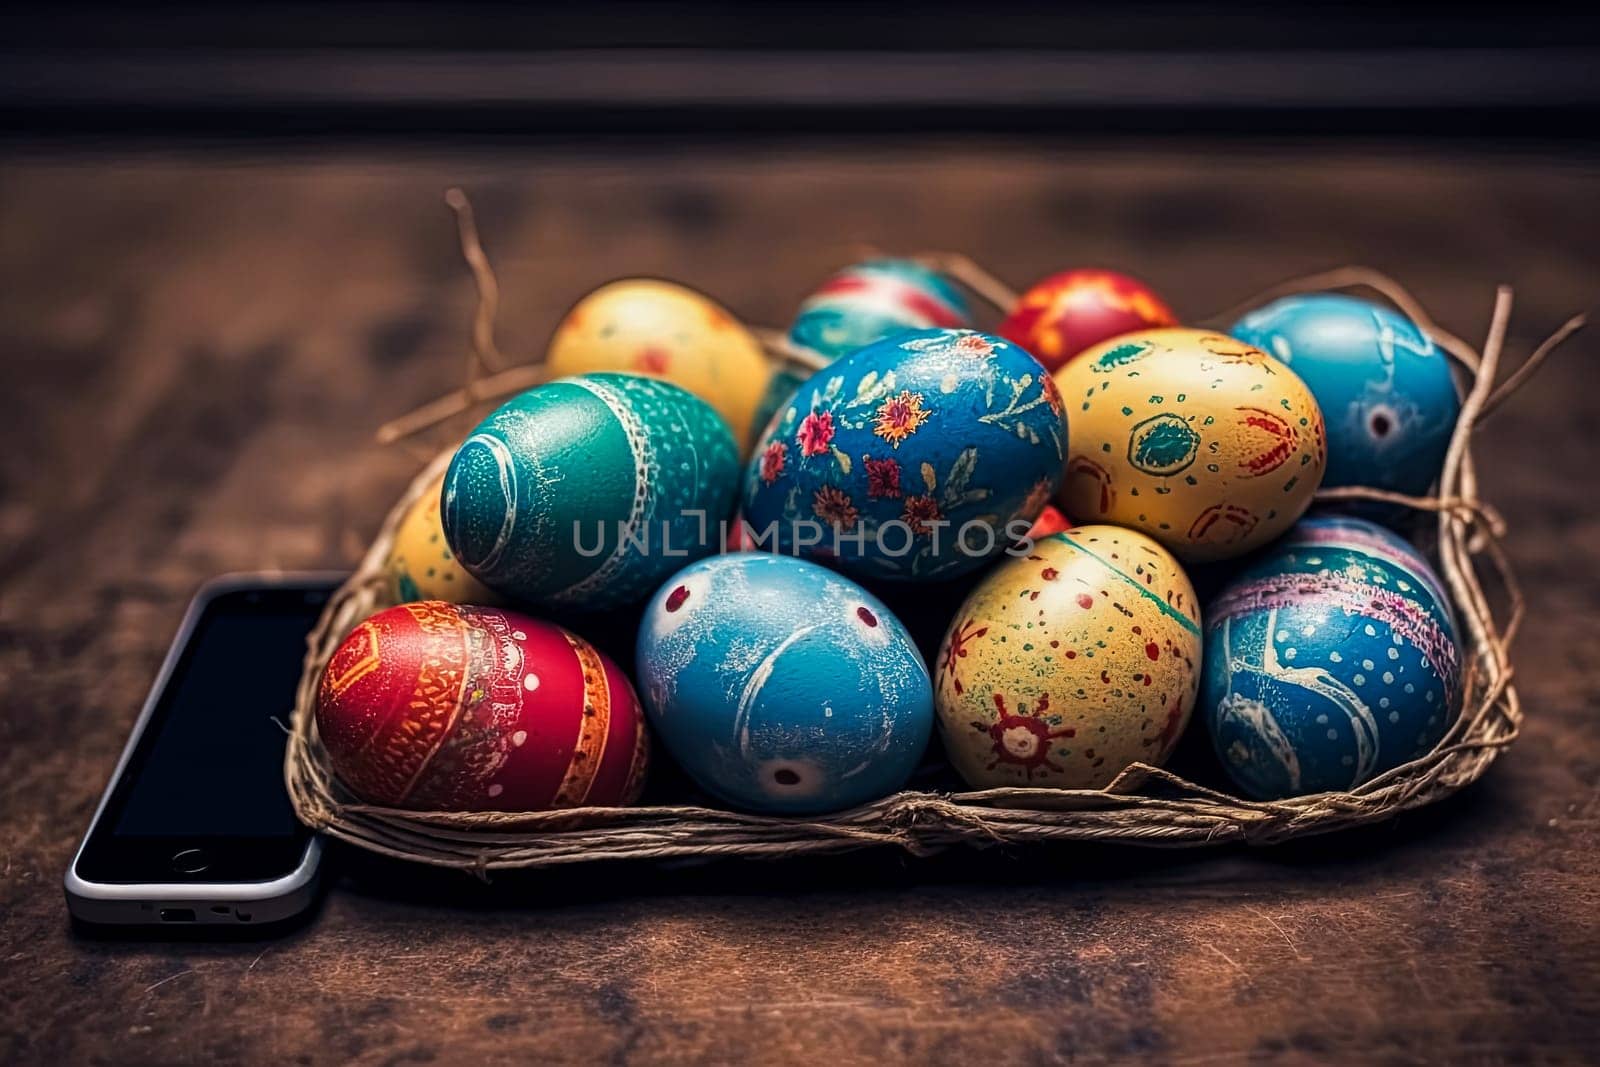 A basket full of colorful Easter eggs sits on a table next to a cell phone by Alla_Morozova93